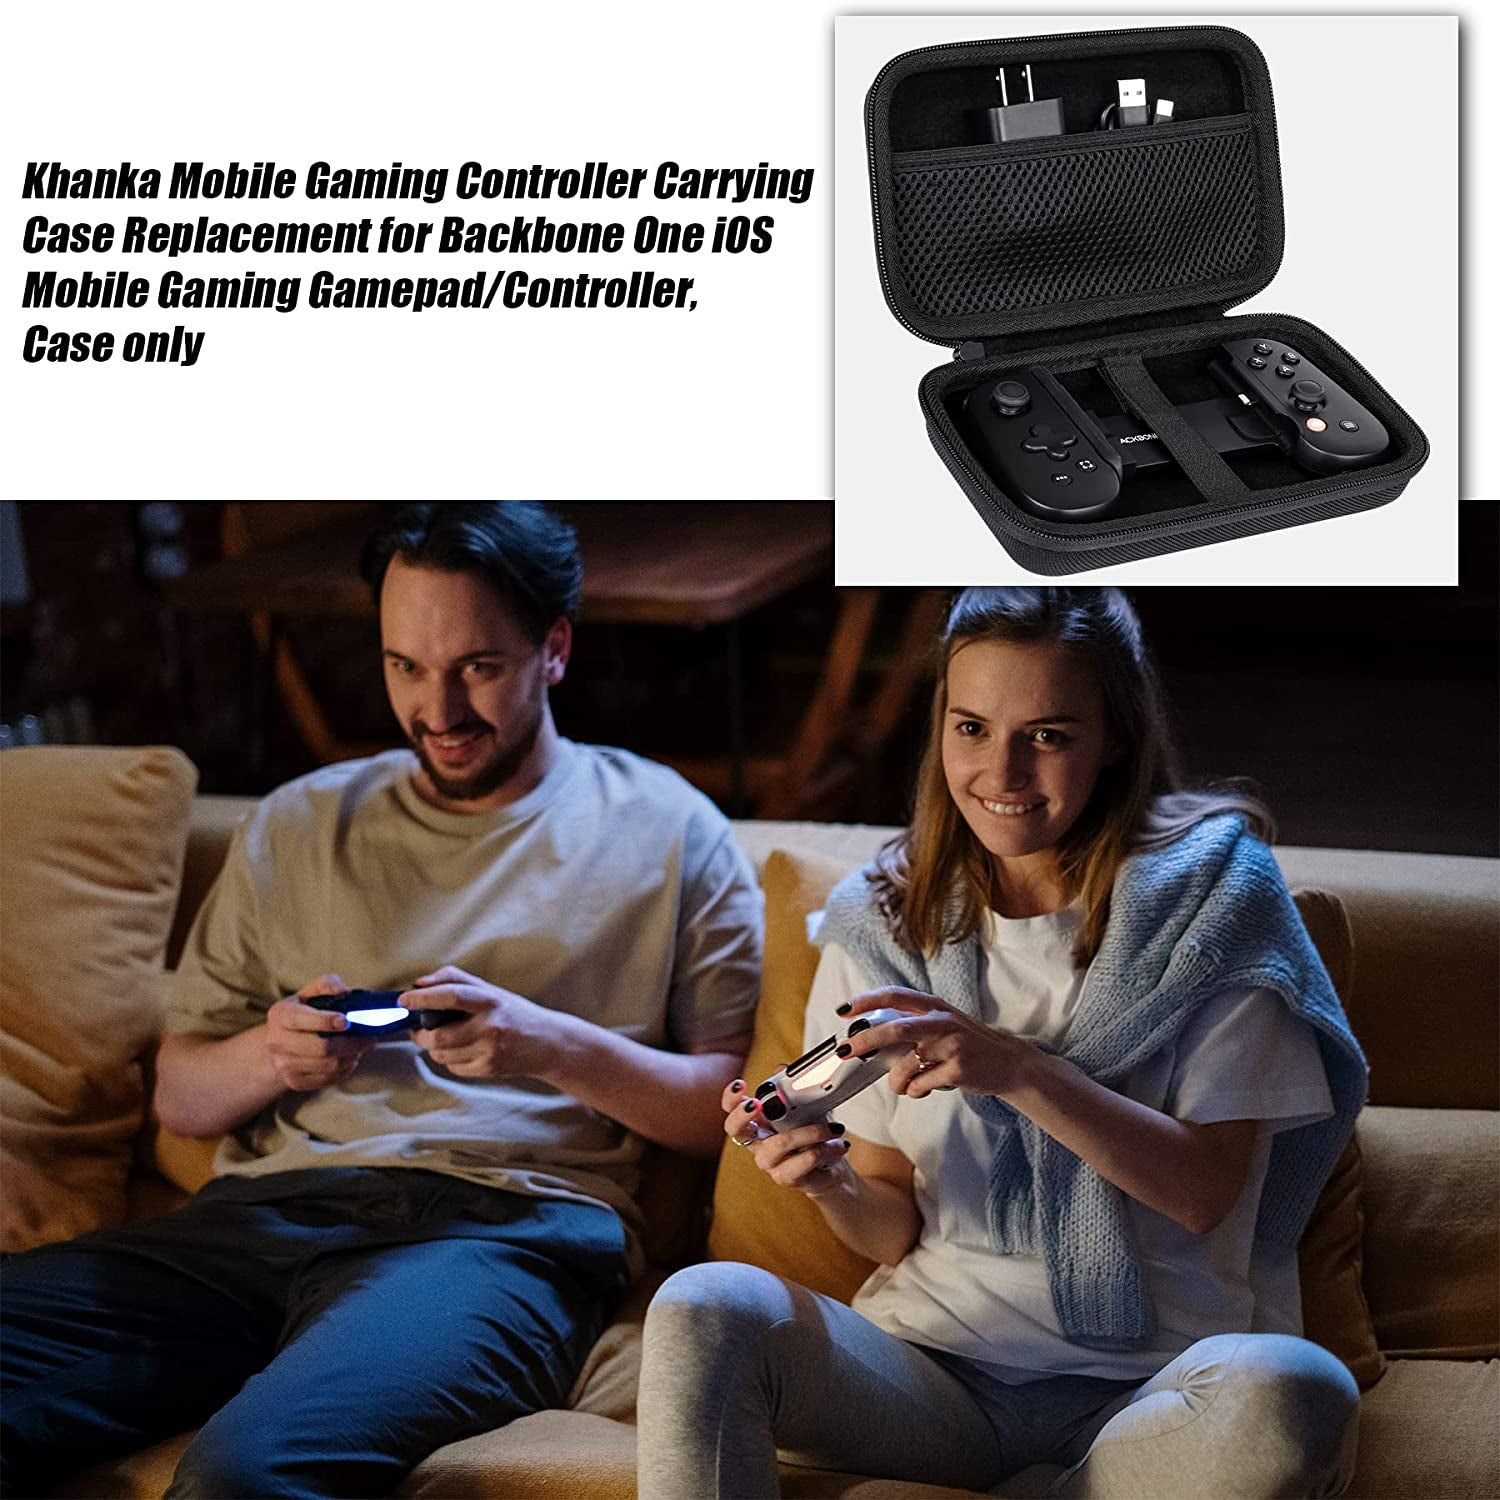 Mobile Gaming Controller Carrying Case Compatible with Backbone One Ios Mobile Gaming Gamepad/Controller, Case Only